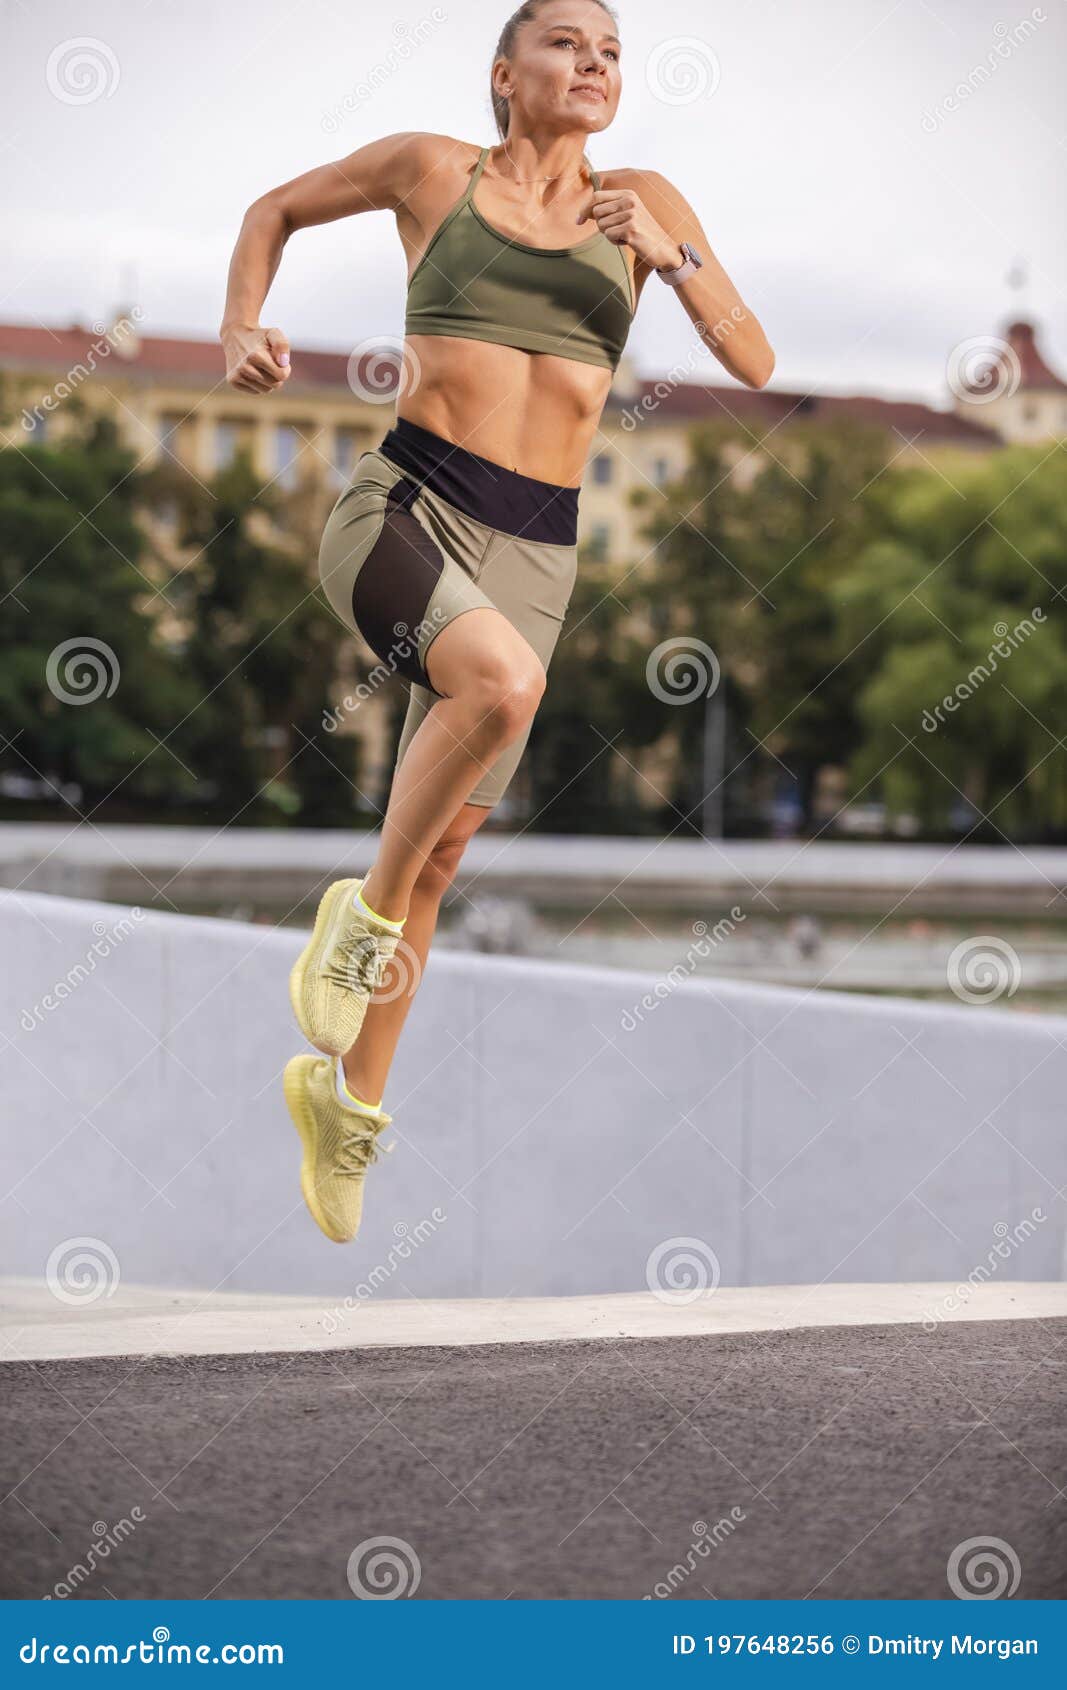 https://thumbs.dreamstime.com/z/young-female-runner-jogging-outfit-her-regular-training-exercises-outdoors-young-female-runner-jogging-outfit-197648256.jpg